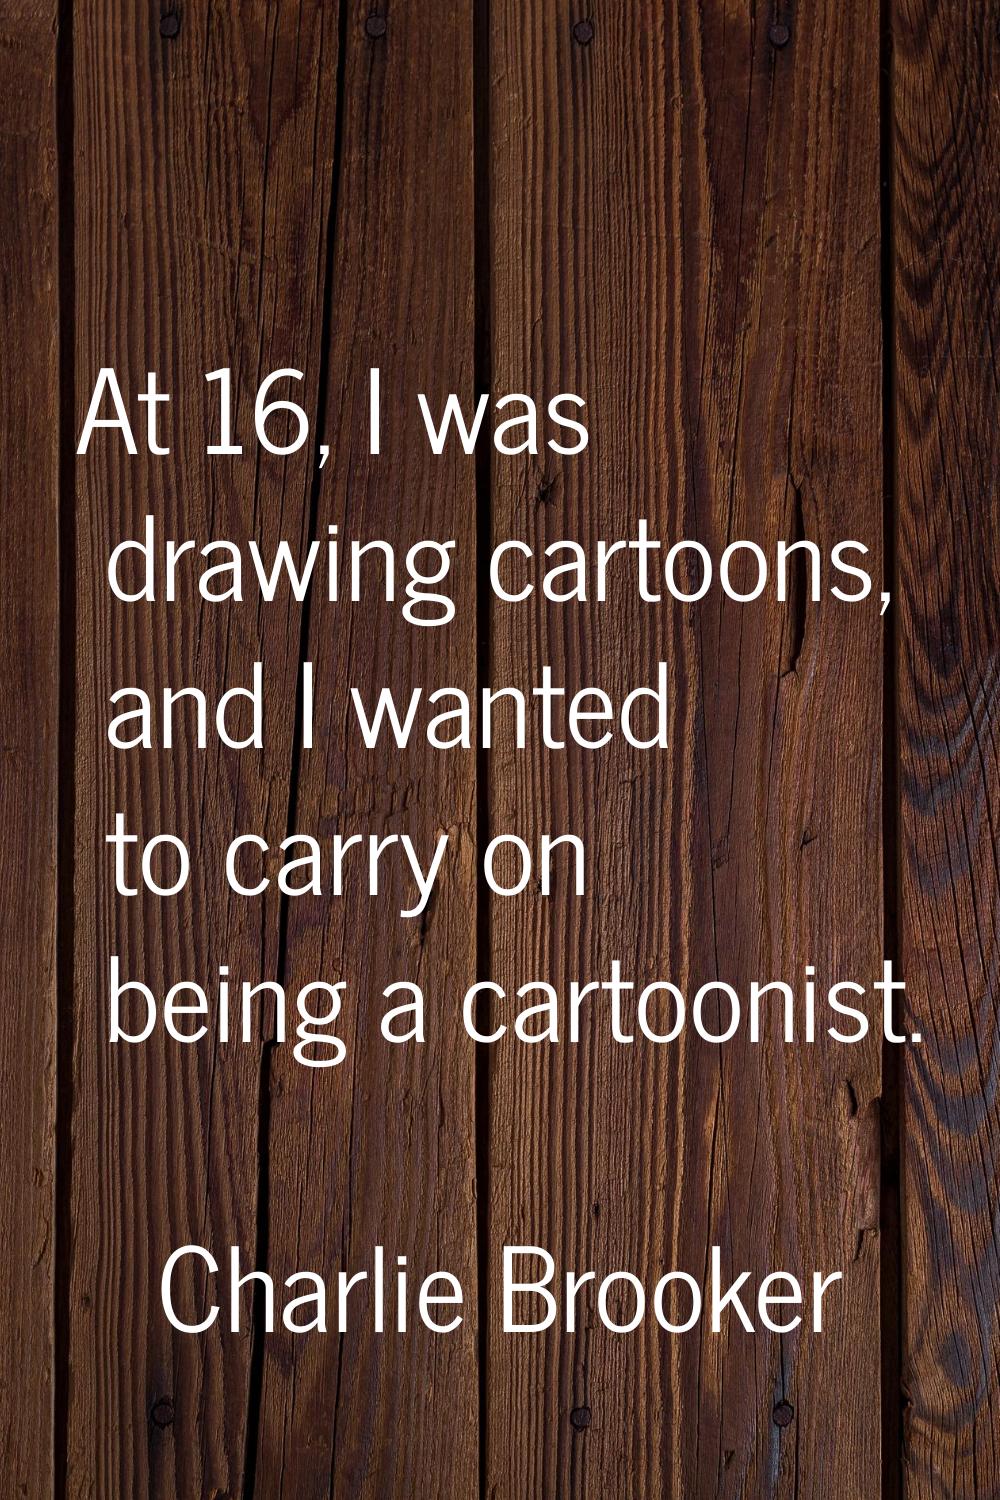 At 16, I was drawing cartoons, and I wanted to carry on being a cartoonist.